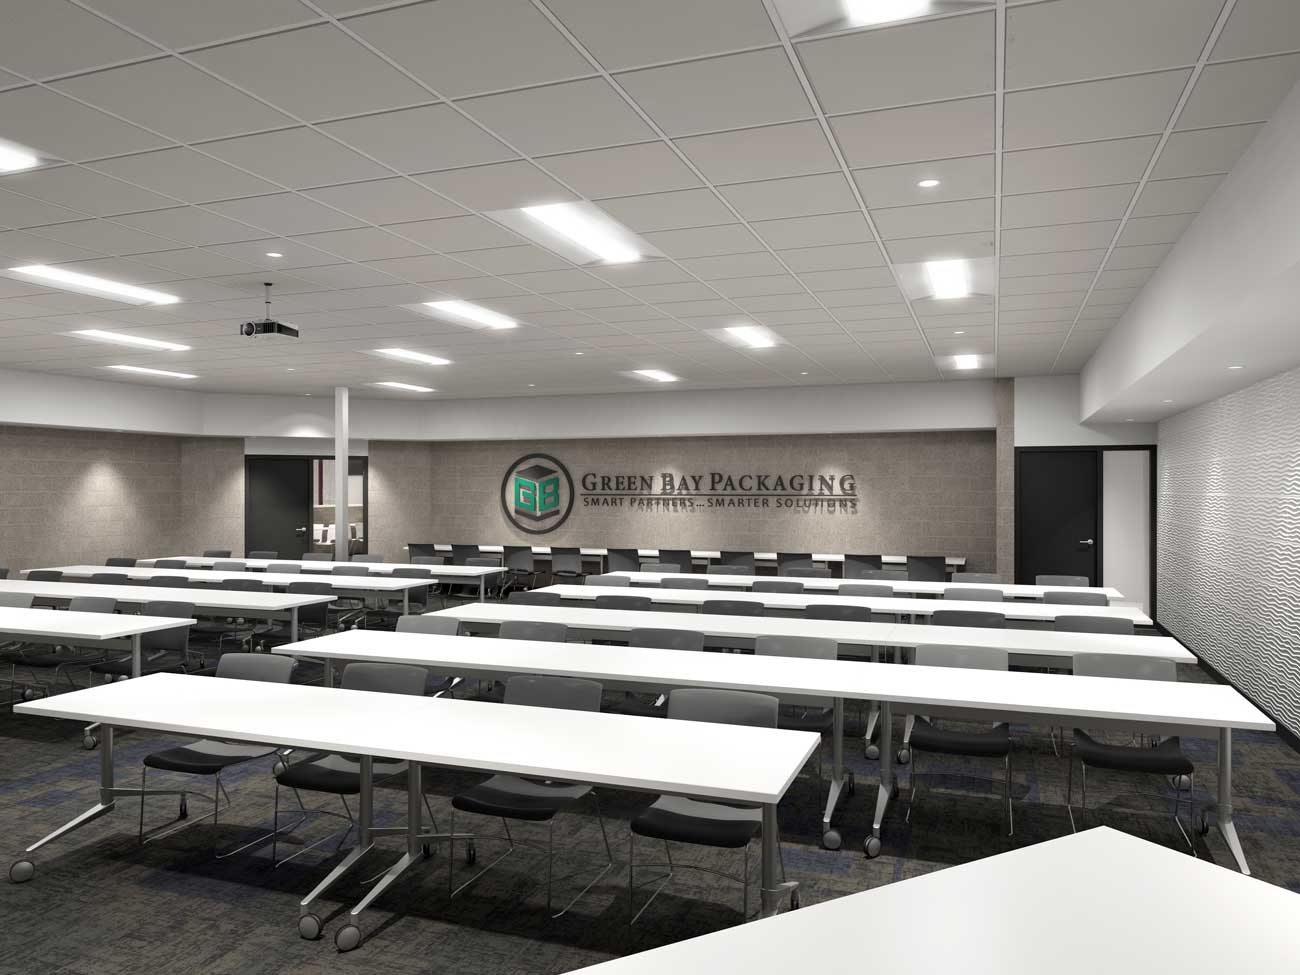 Interior image of large training room with a clean look designed by local Minnesota architects